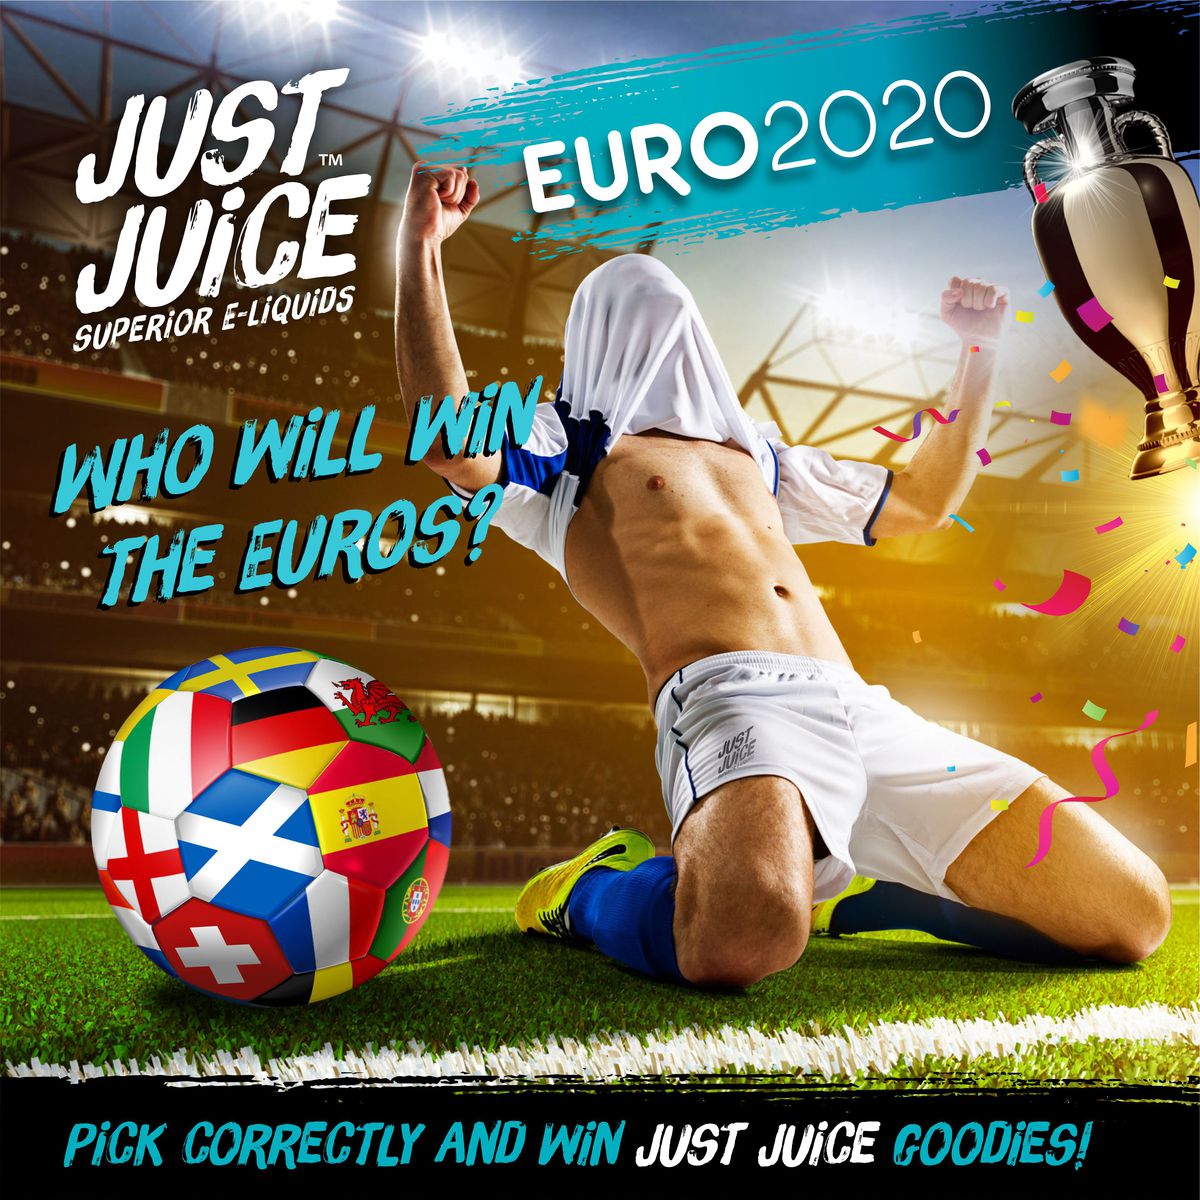 CALLING ALL PUNDITS 🗣️

EURO 2020 ⚽ is just around the corner and here's your chance to win some Just Juice goodies! 🤩

How to enter:
1. Comment who you think will win Euro 2020 🏆
2. Tag a wannabe pundit or two
3. Like & Retweet 🔄

#JustJuiceUK #VapeGiveaway #VapeUK #Euro2020